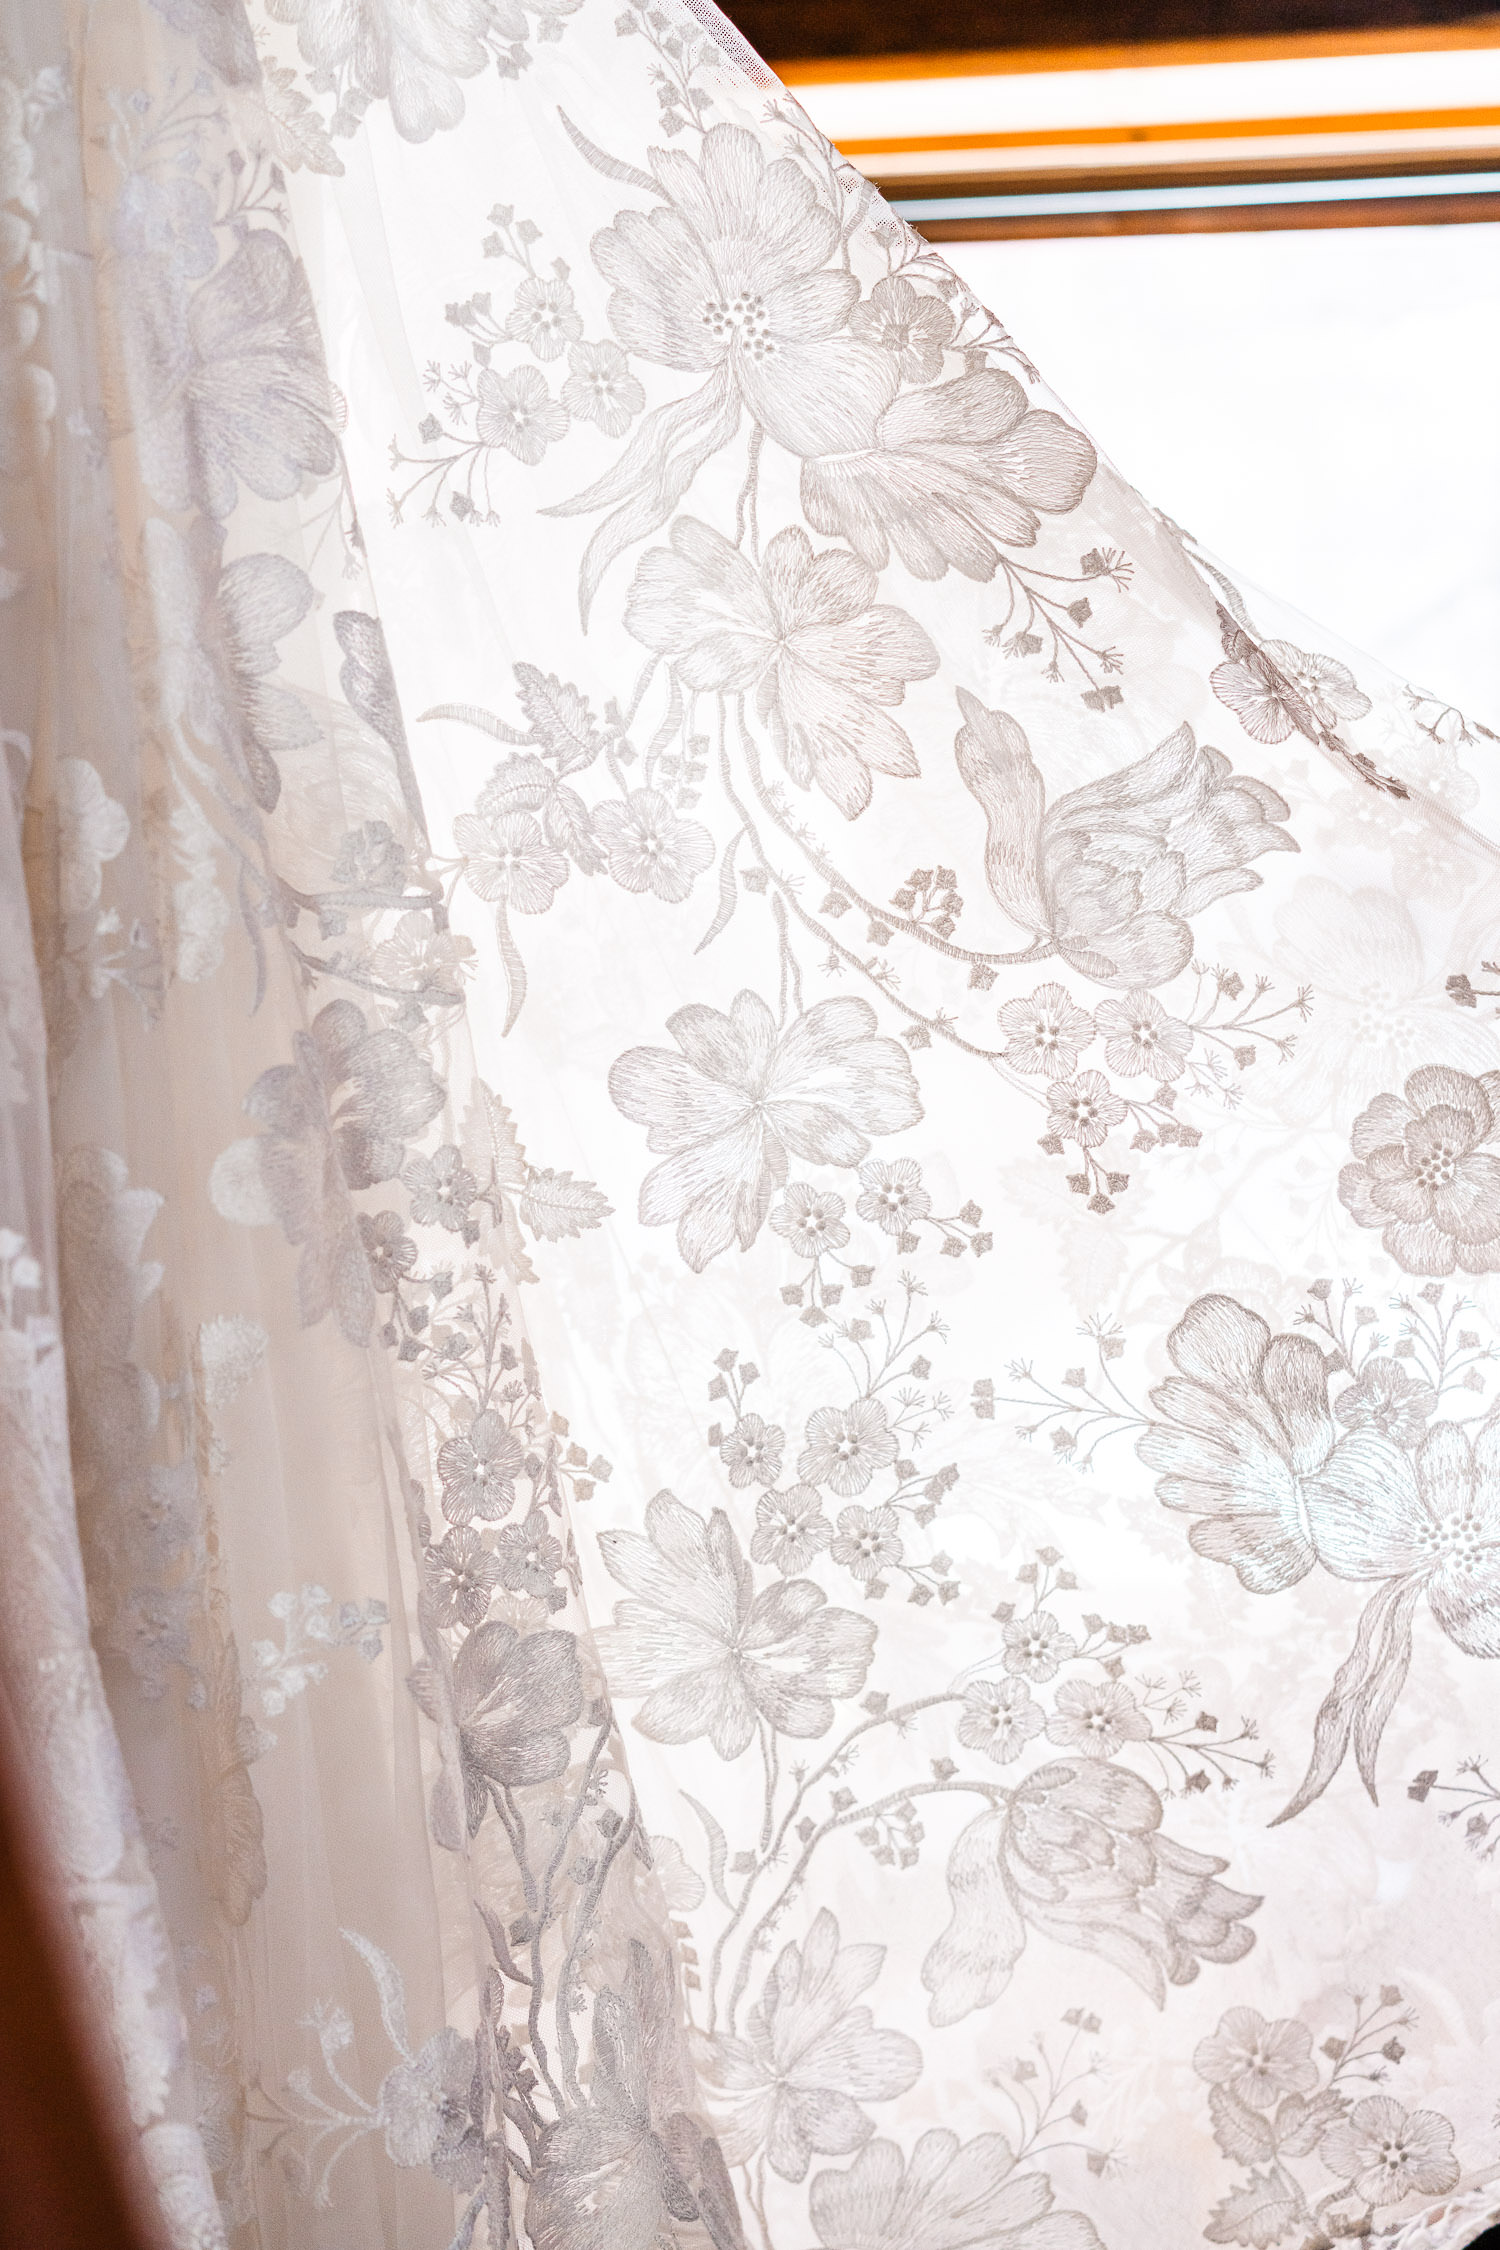 Natural light cascading through the floral fabric of a wedding dress